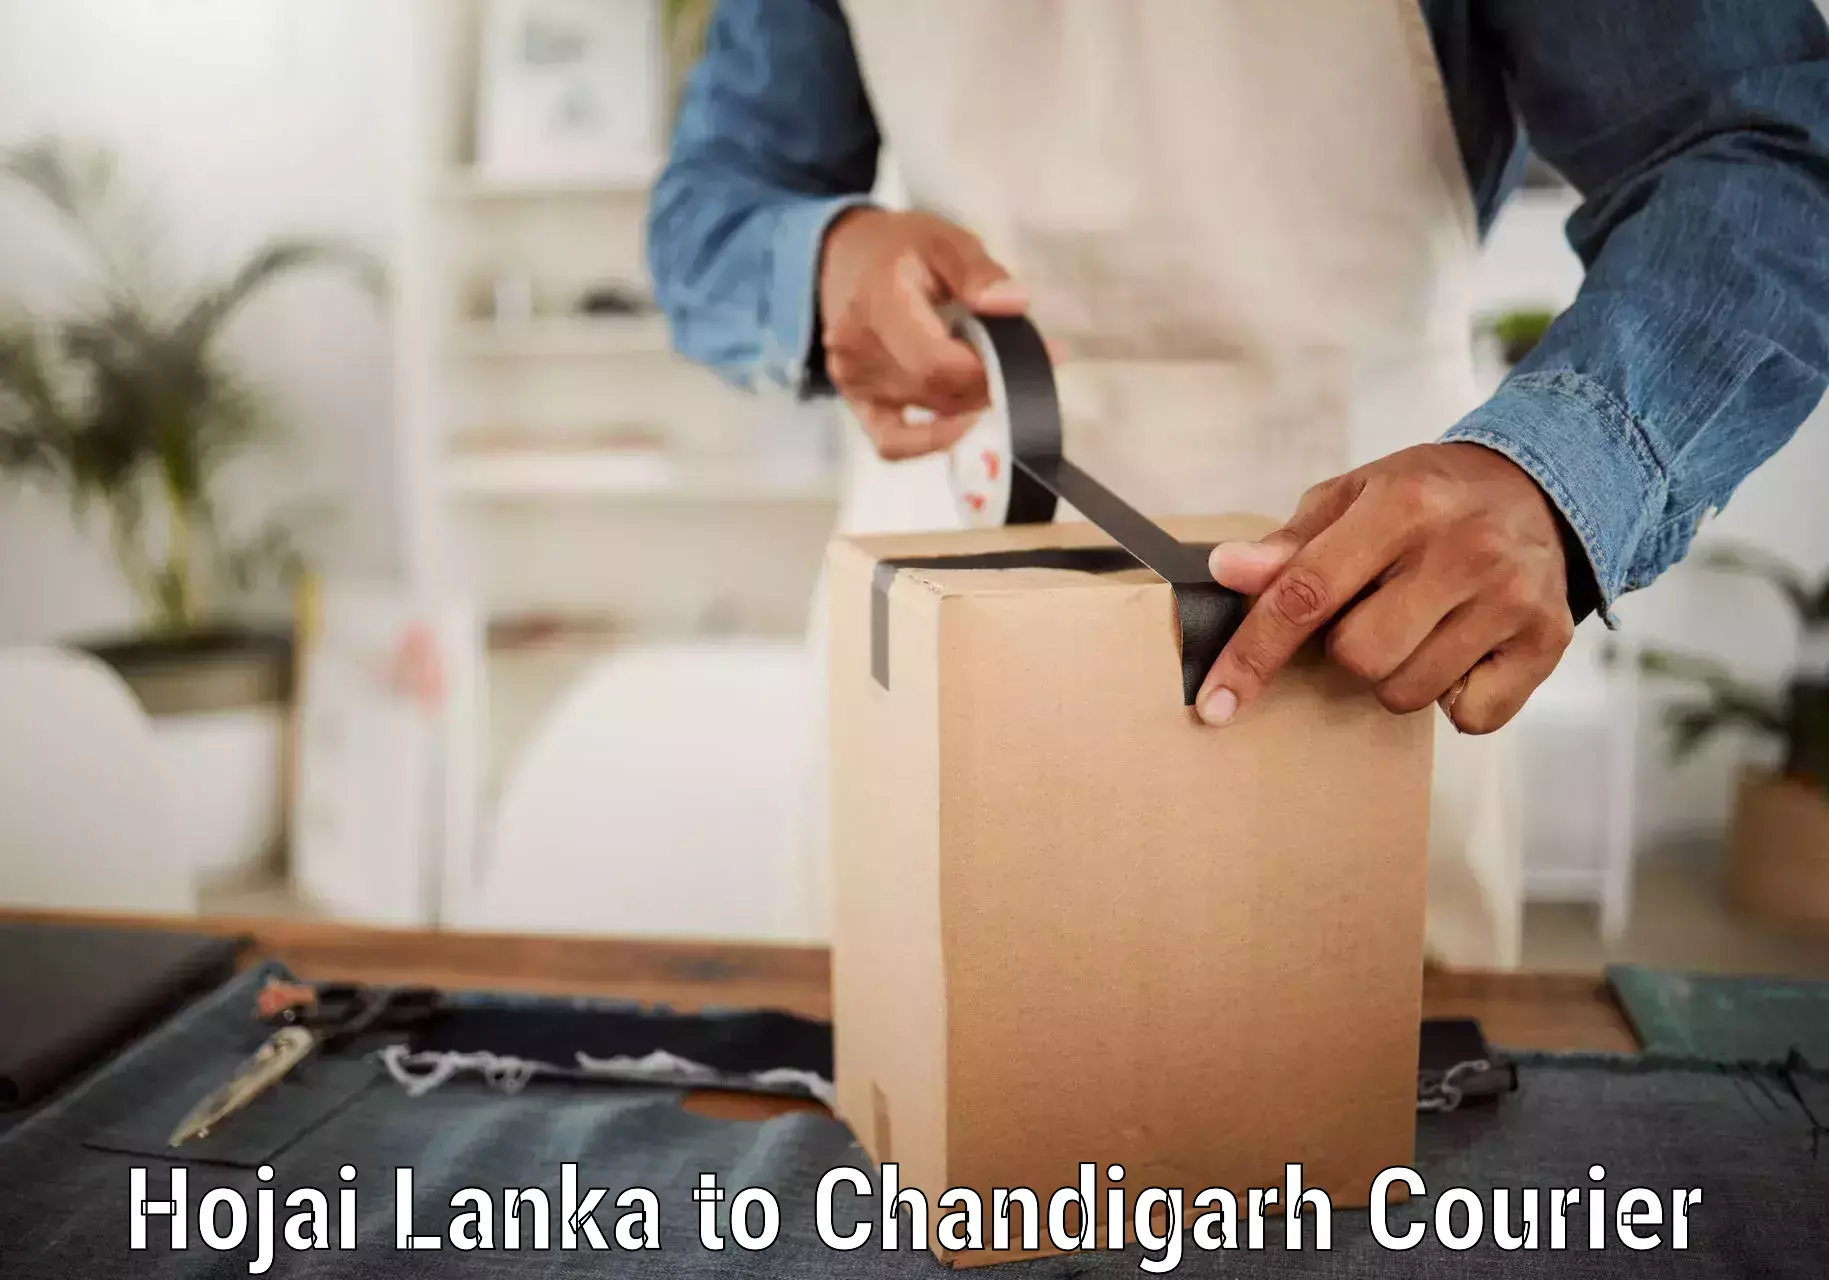 Cost-effective freight solutions Hojai Lanka to Chandigarh